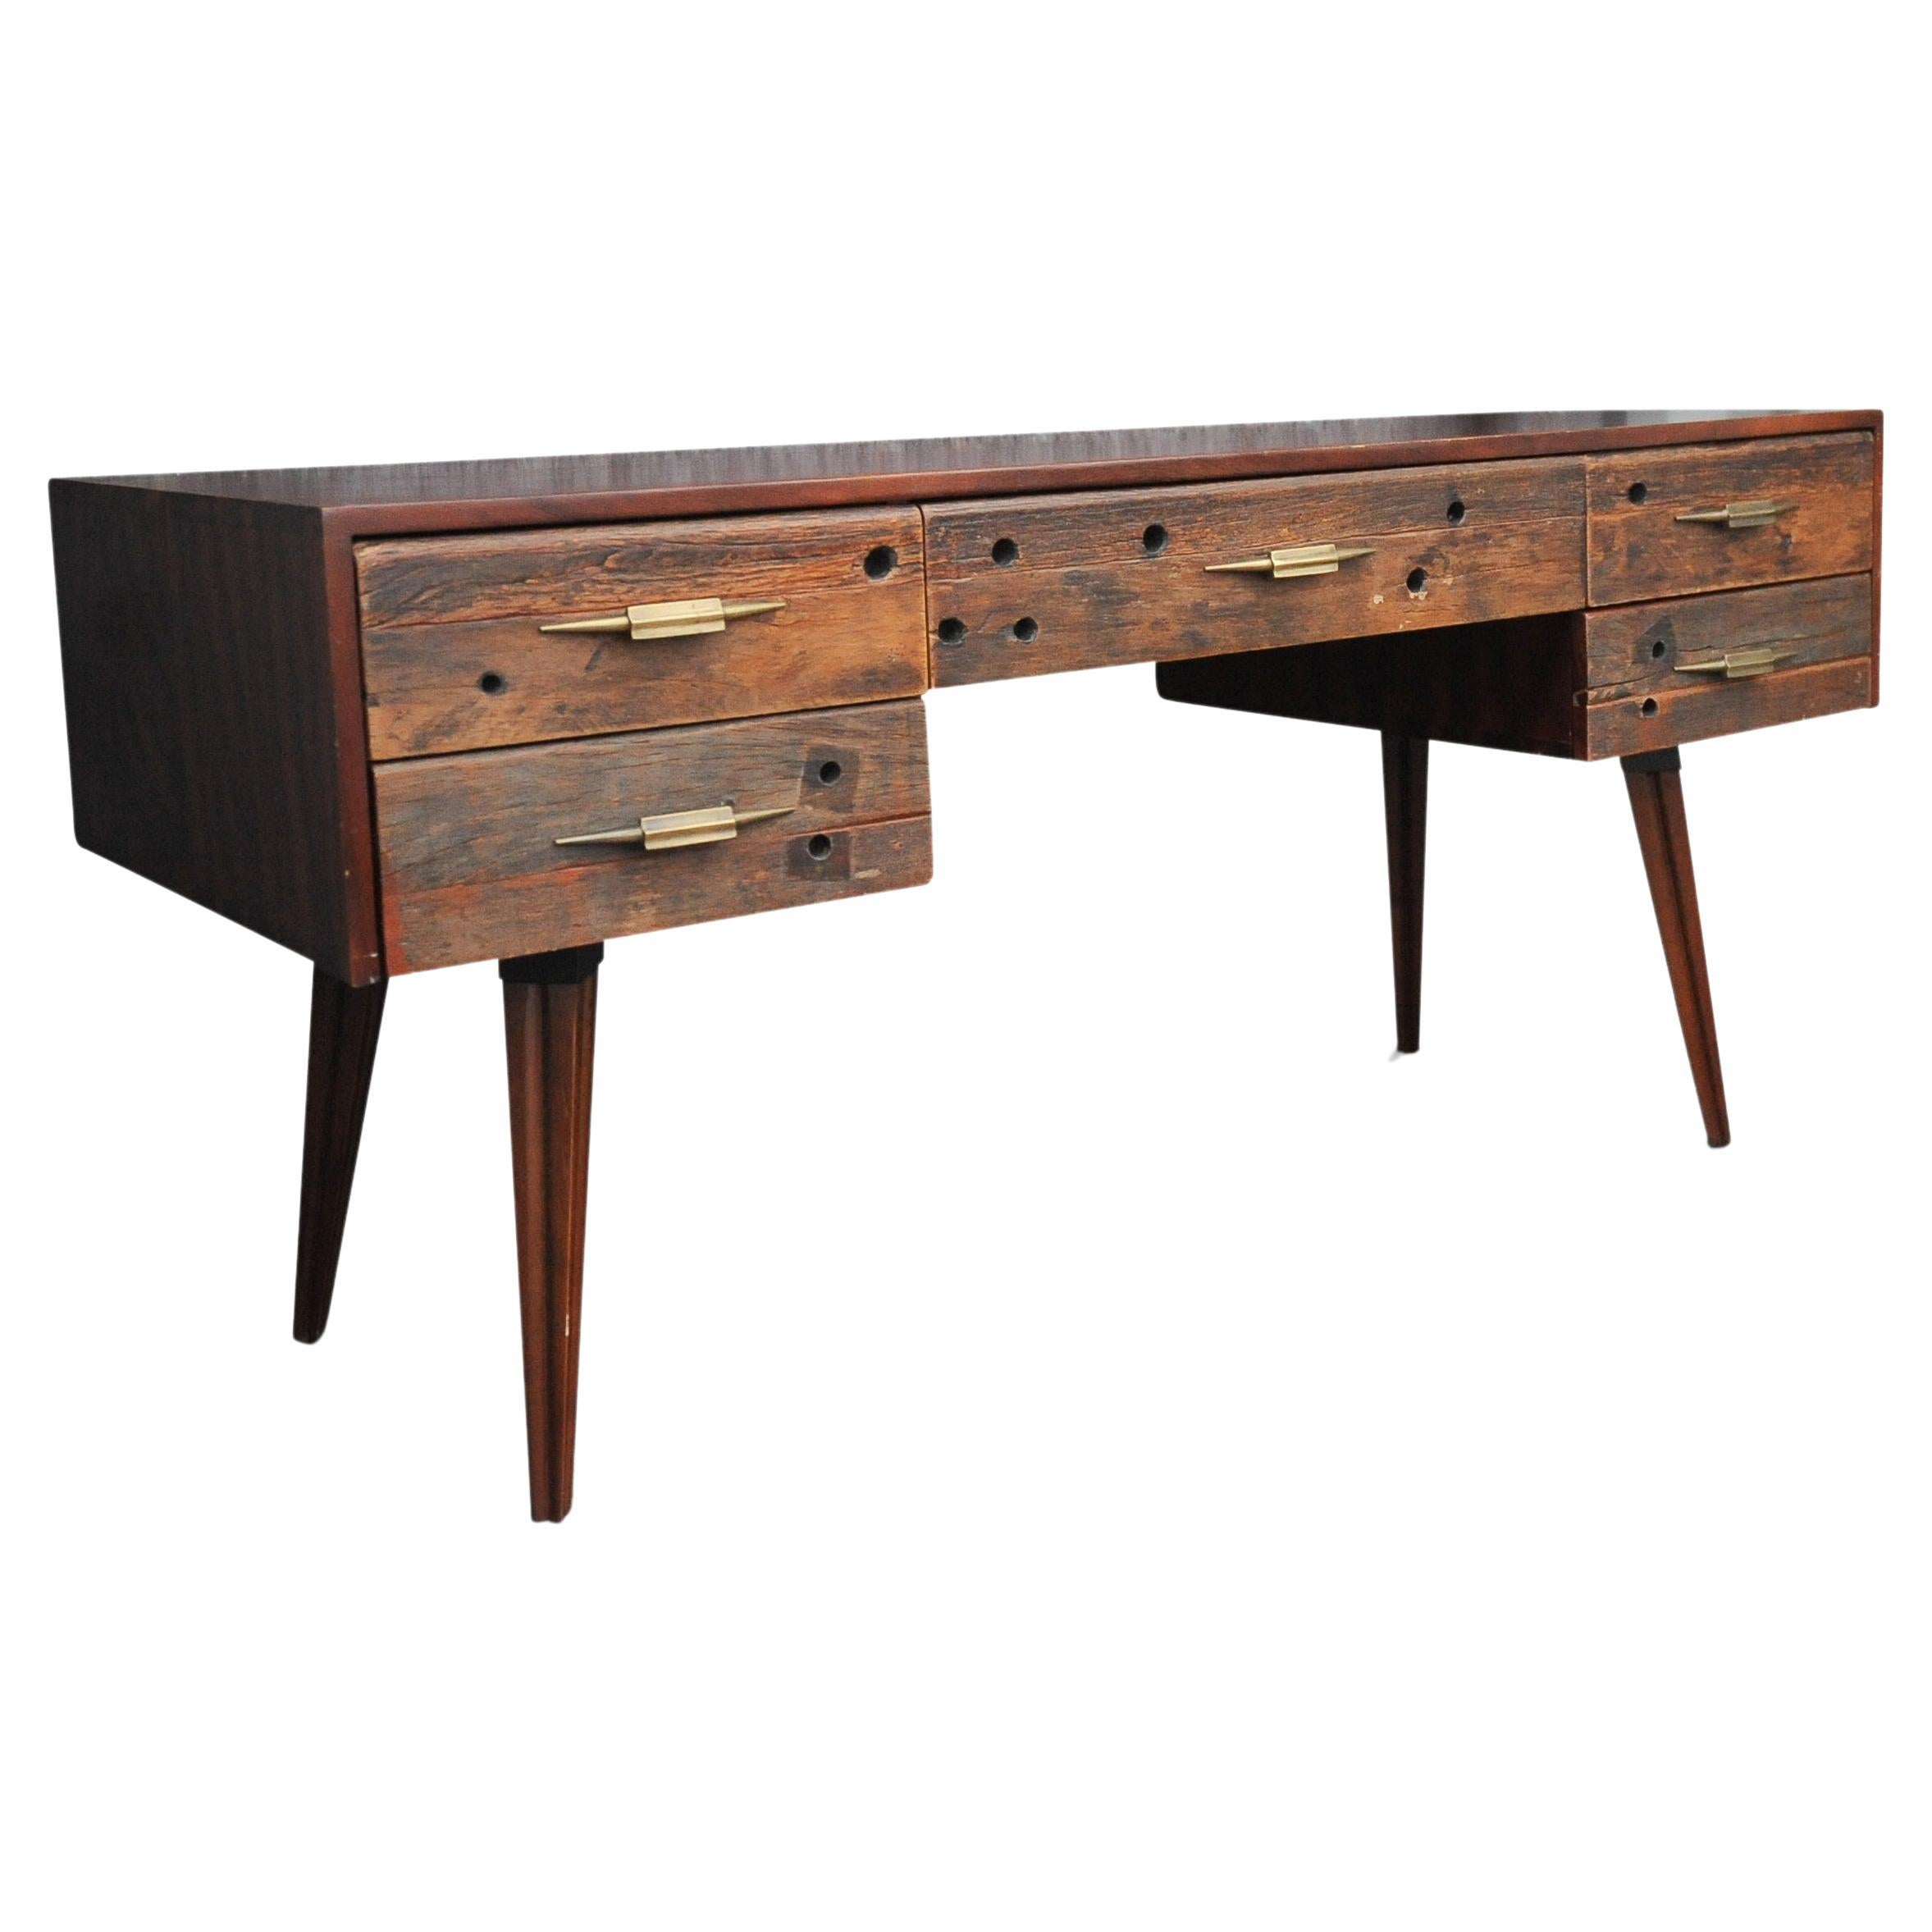 An Impressive Hardwood & Reclaimed Timber Desk Befit With Five Drawers & Gilded Handles.
The external frame tips it's hat to midcentury, the drawer handles reflect and a more art deco styling.

Will work great in a commercial or home